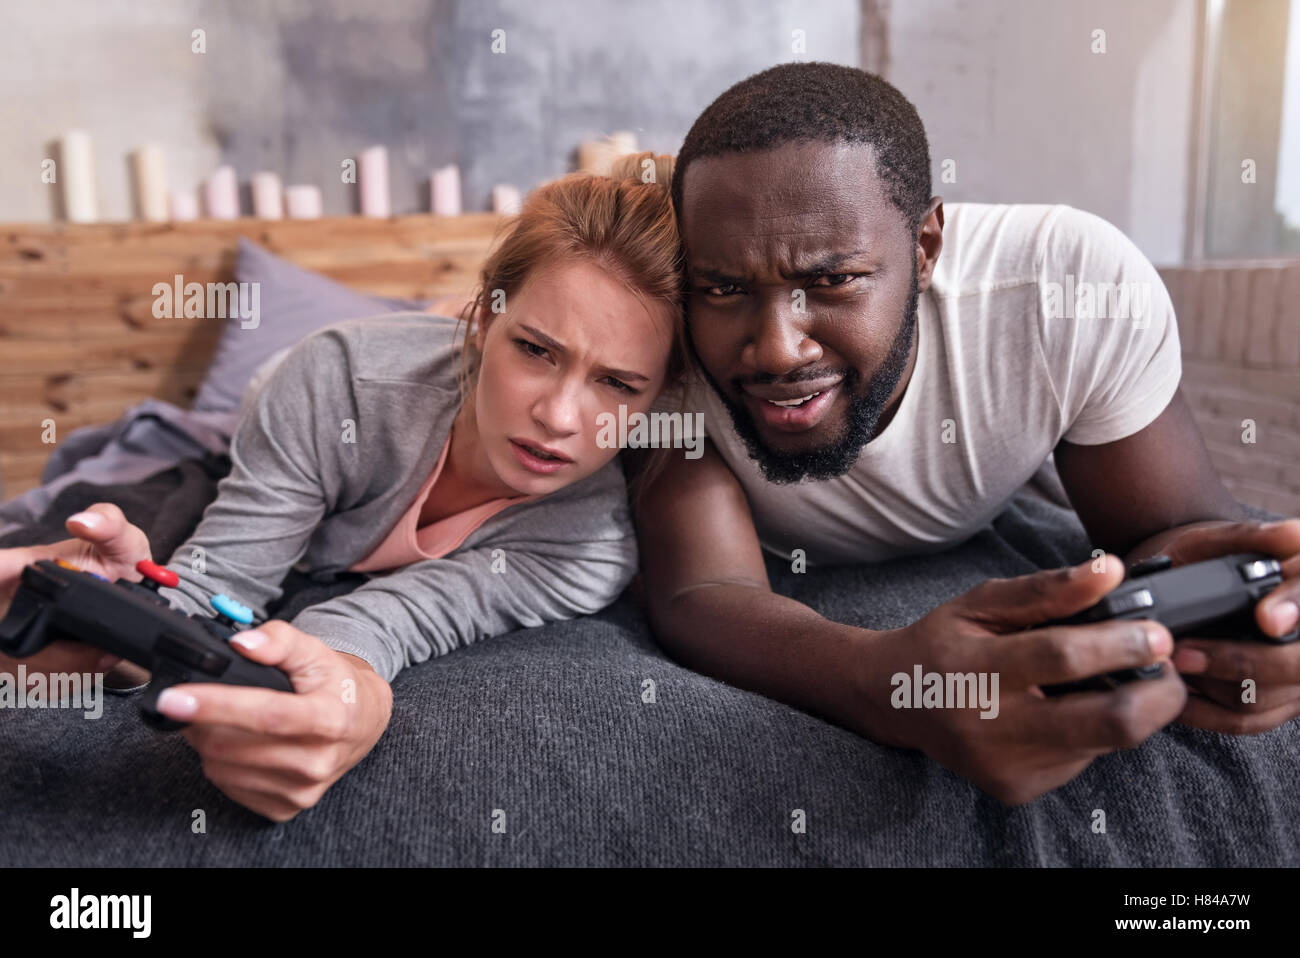 Amused couple playing video games in bedroom together Stock Photo